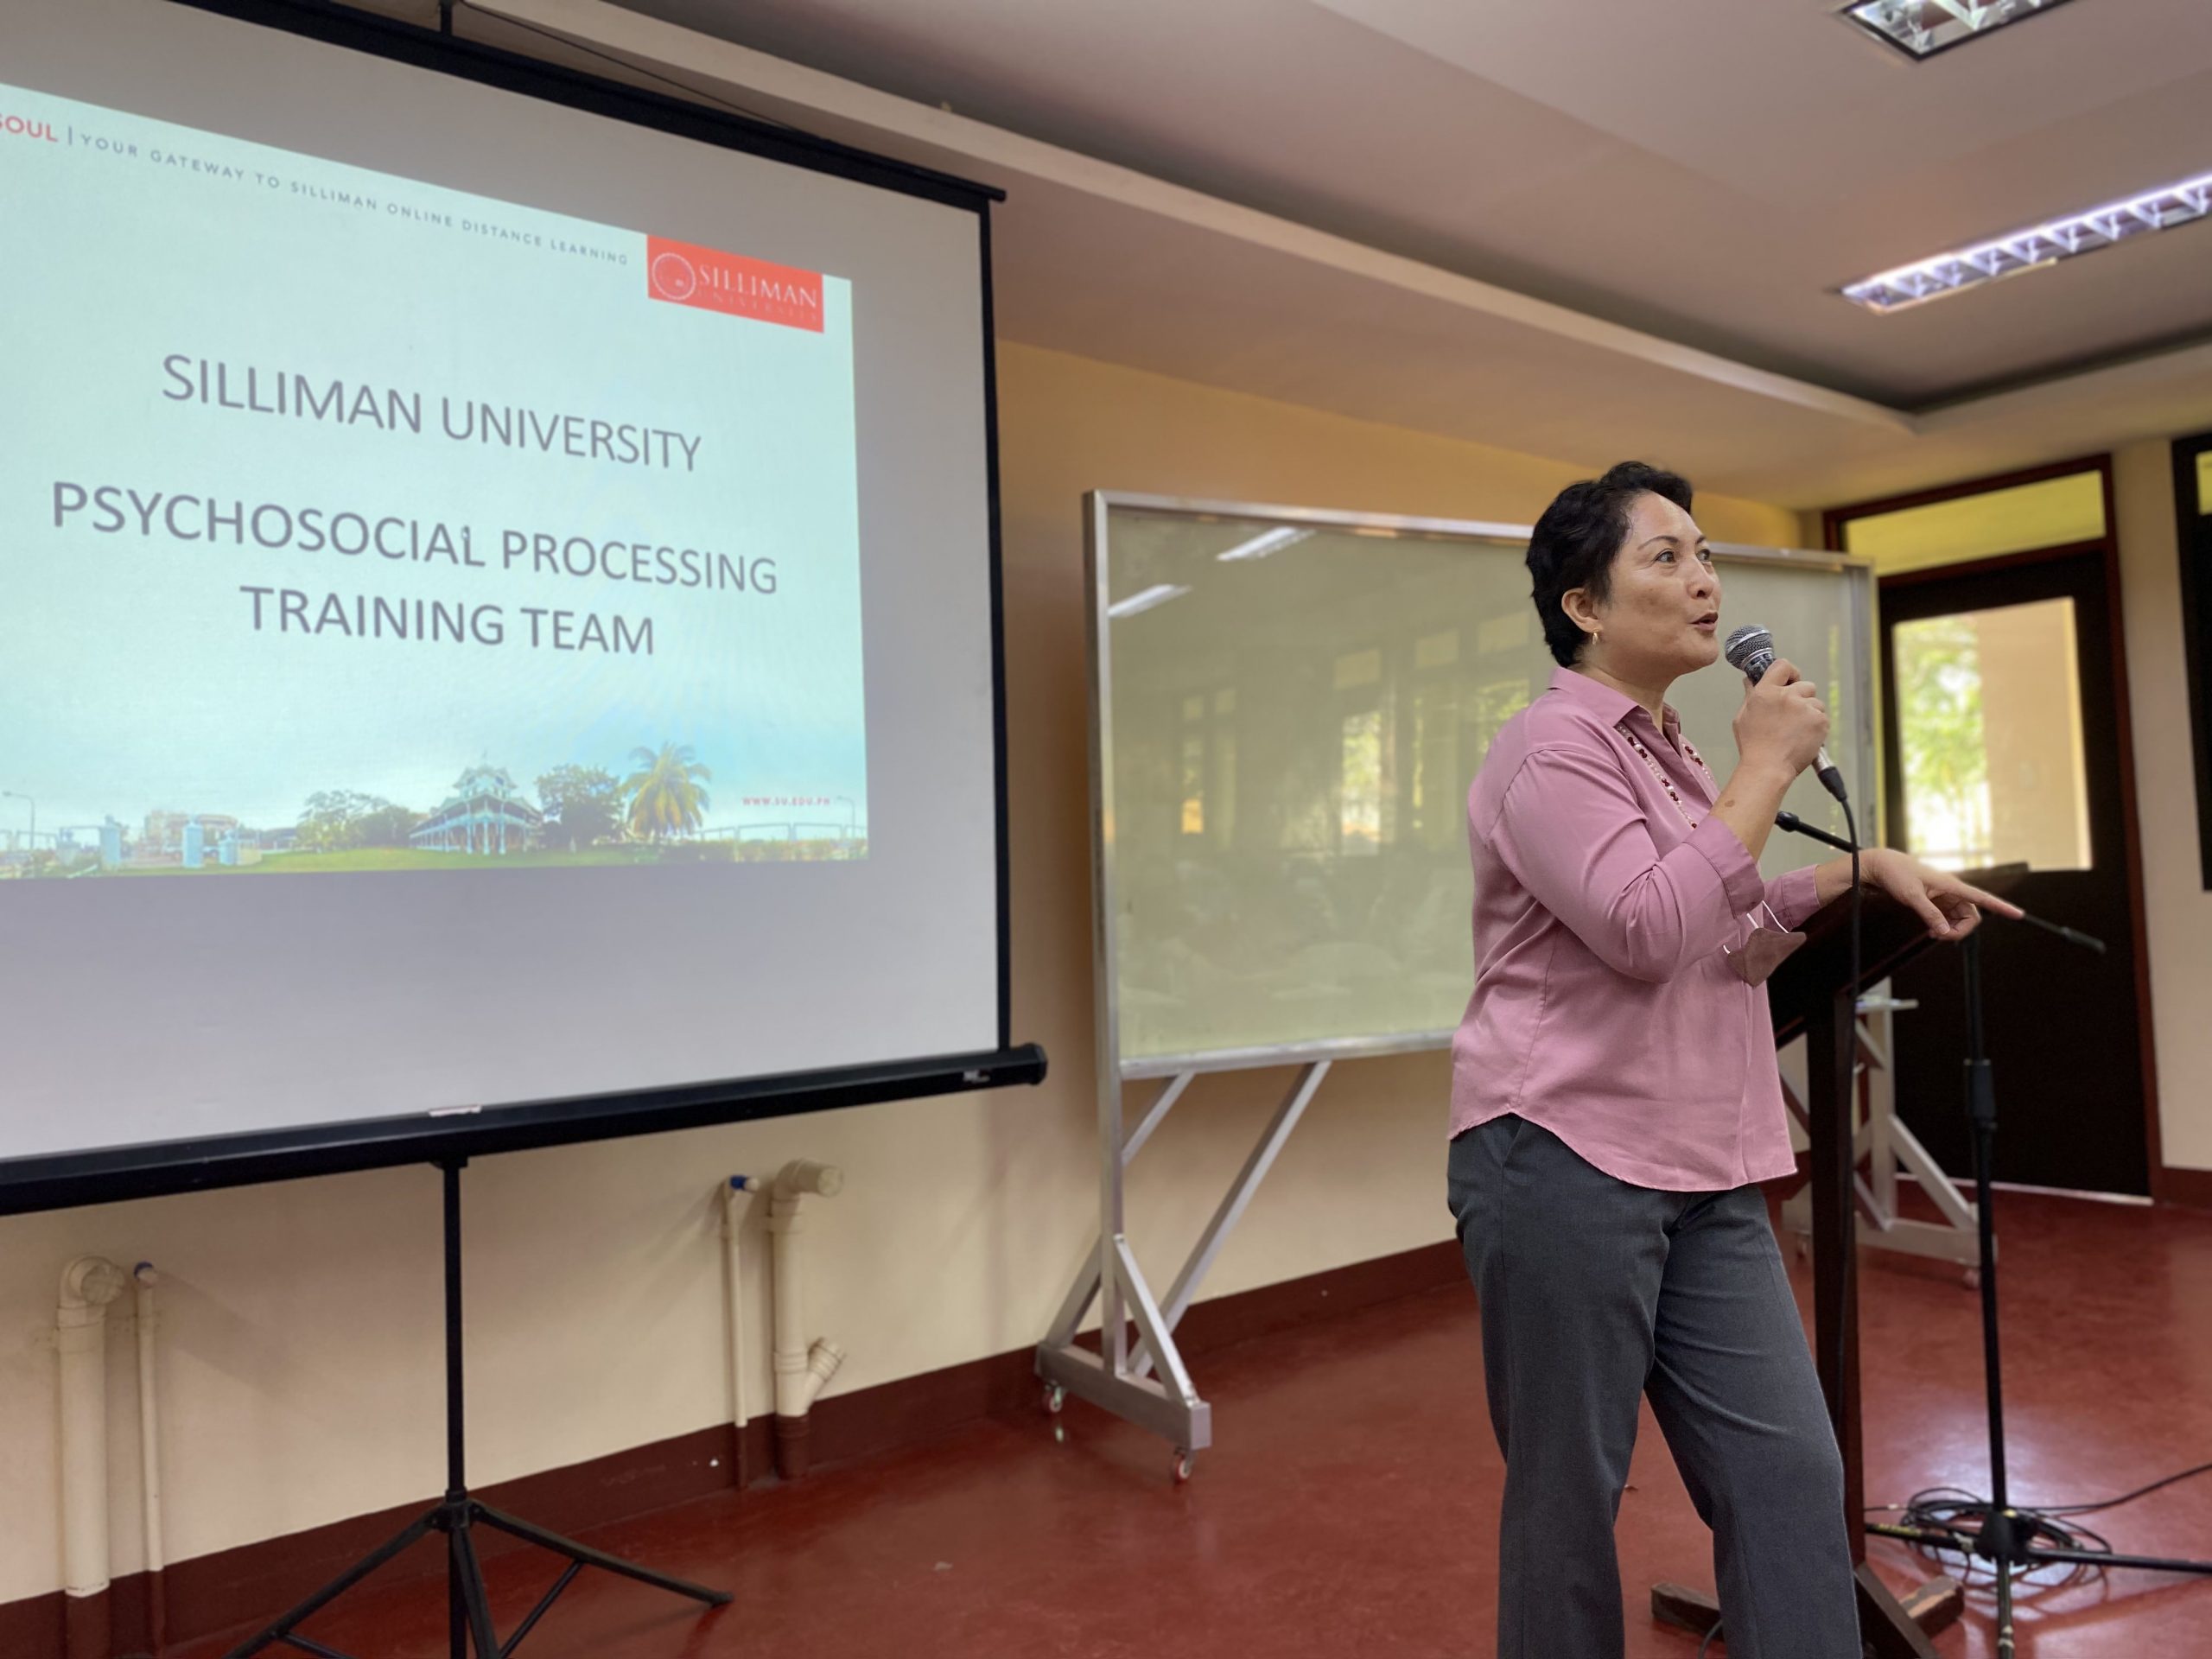 OCESL trains students in psychosocial processing